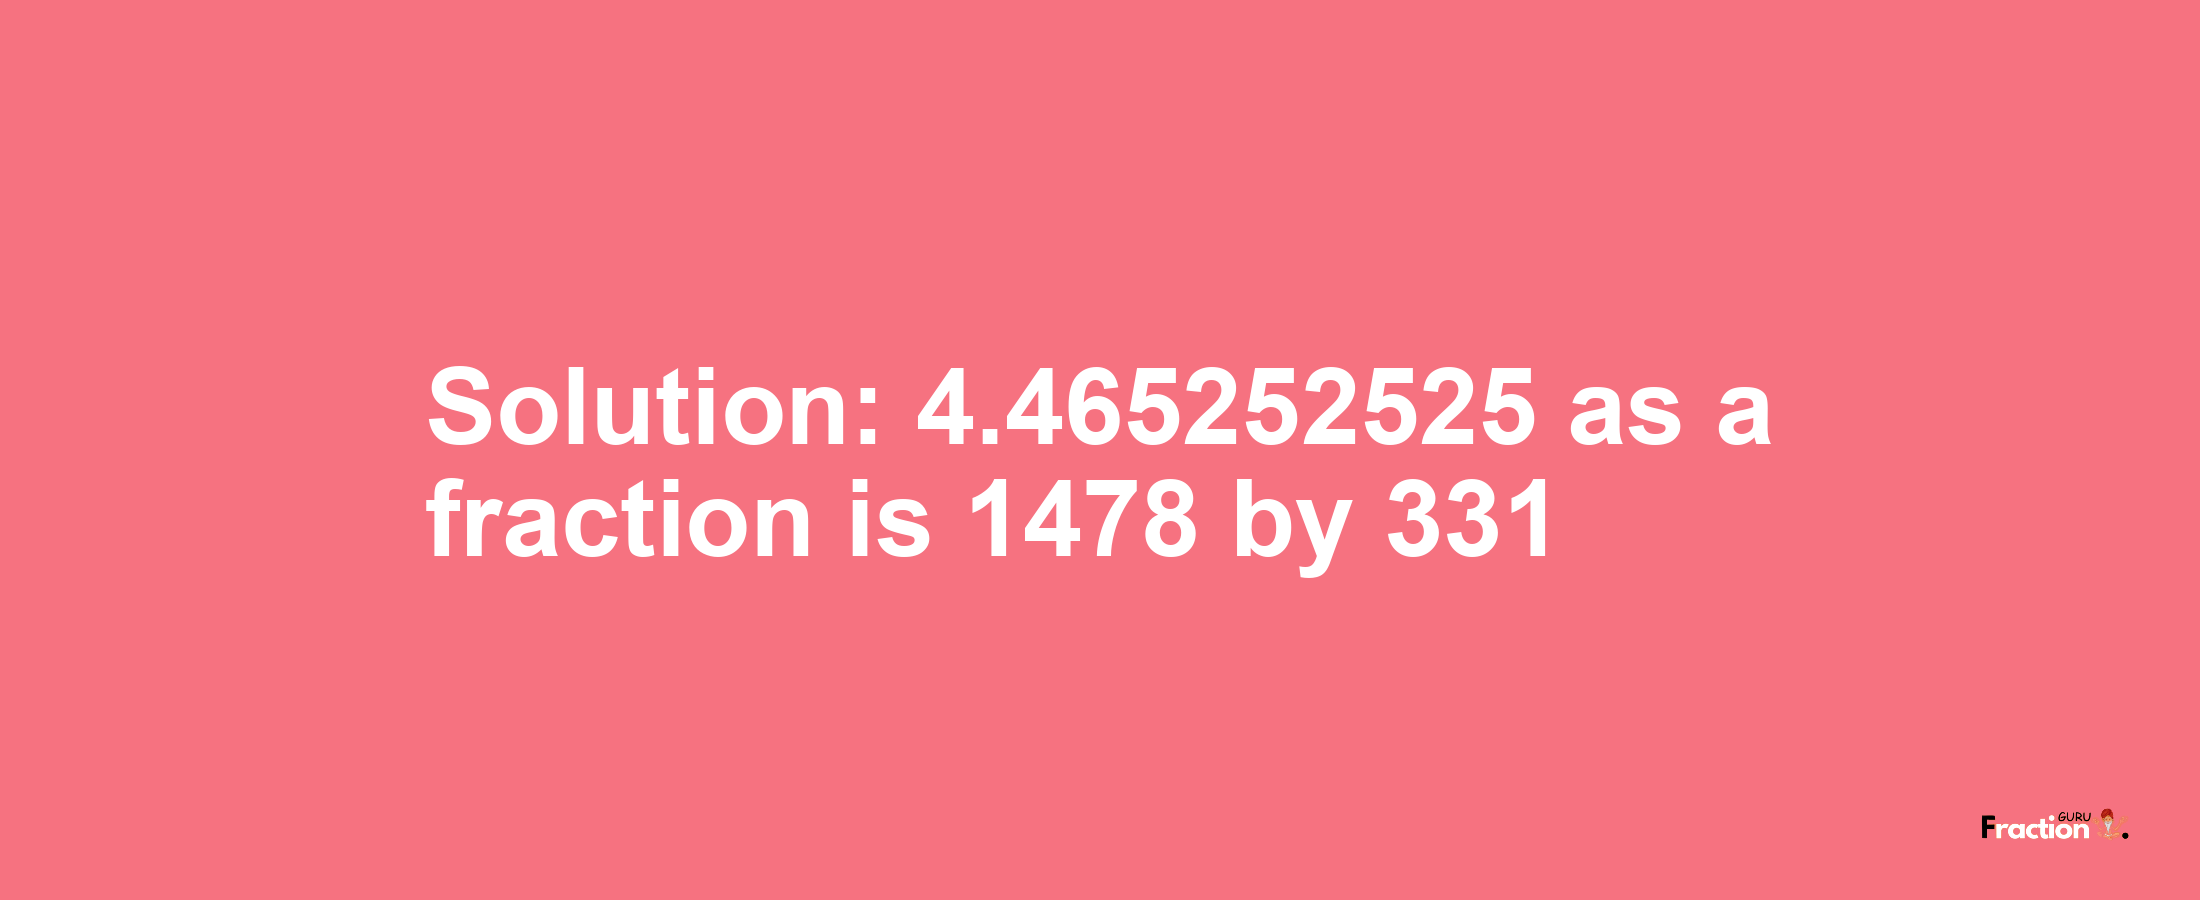 Solution:4.465252525 as a fraction is 1478/331